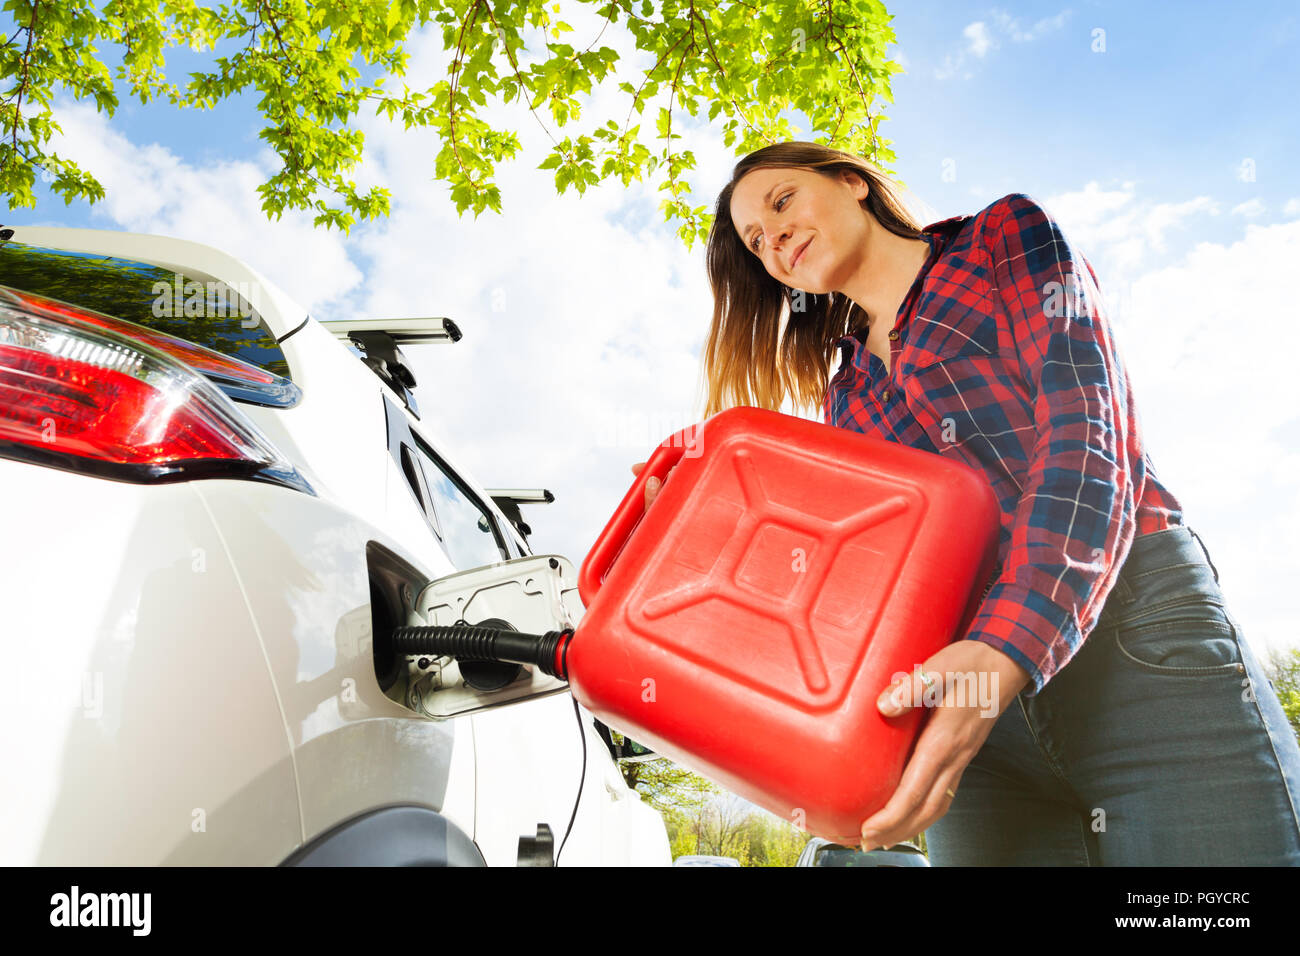 Low-angle shot of beautiful young woman pouring fuel into the gas tank of her car from a red can Stock Photo